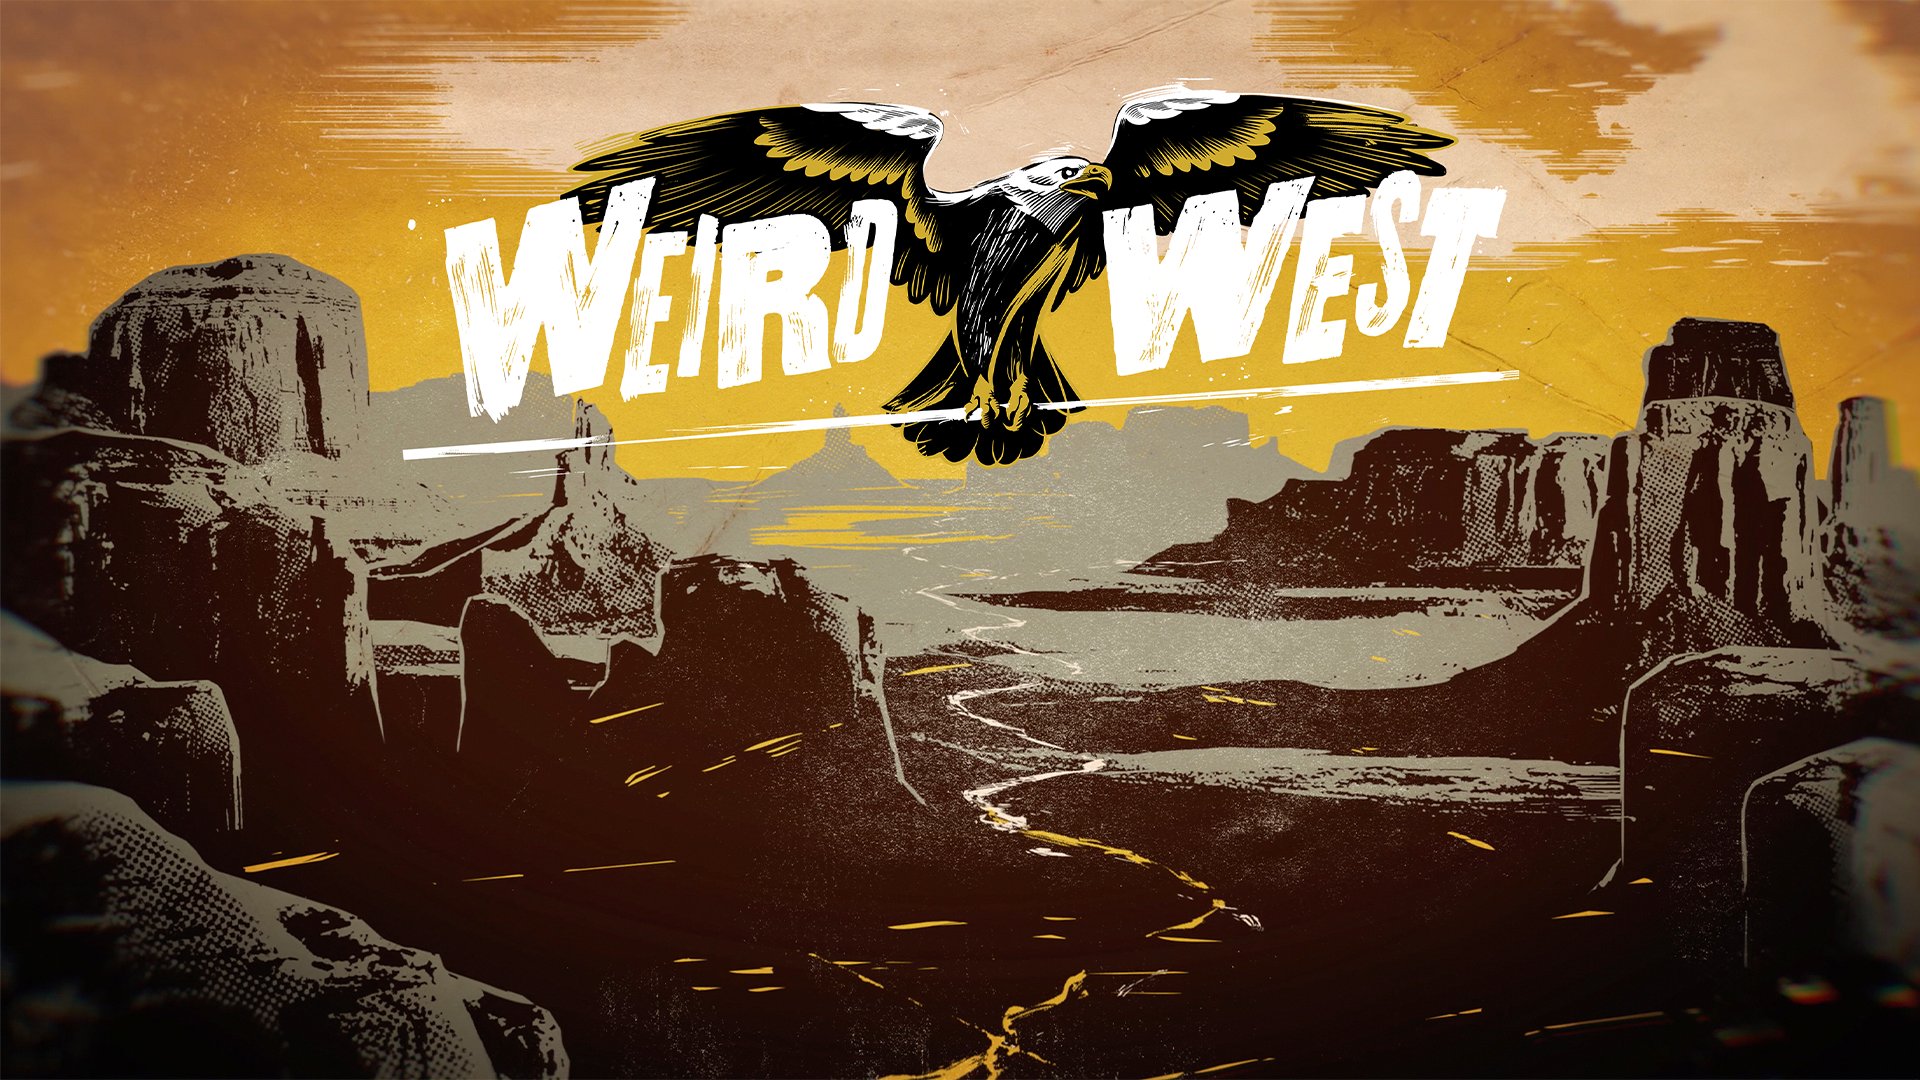 Video For Weird West Available Today with Xbox Game Pass